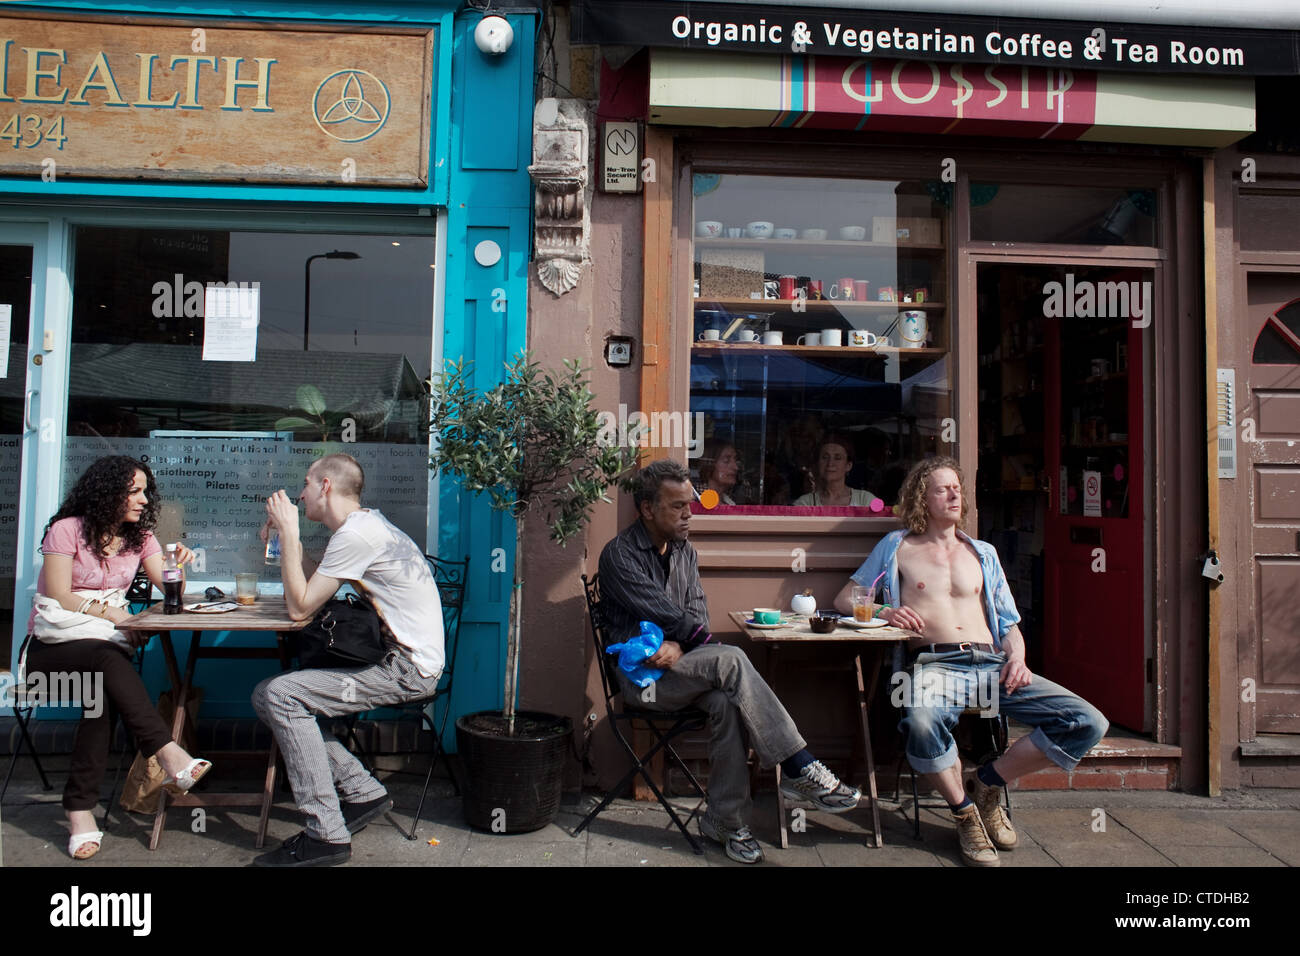 It's a hot day and people relax outside the Holistic Health shop and the vegan coffee shop Gossip. Stock Photo